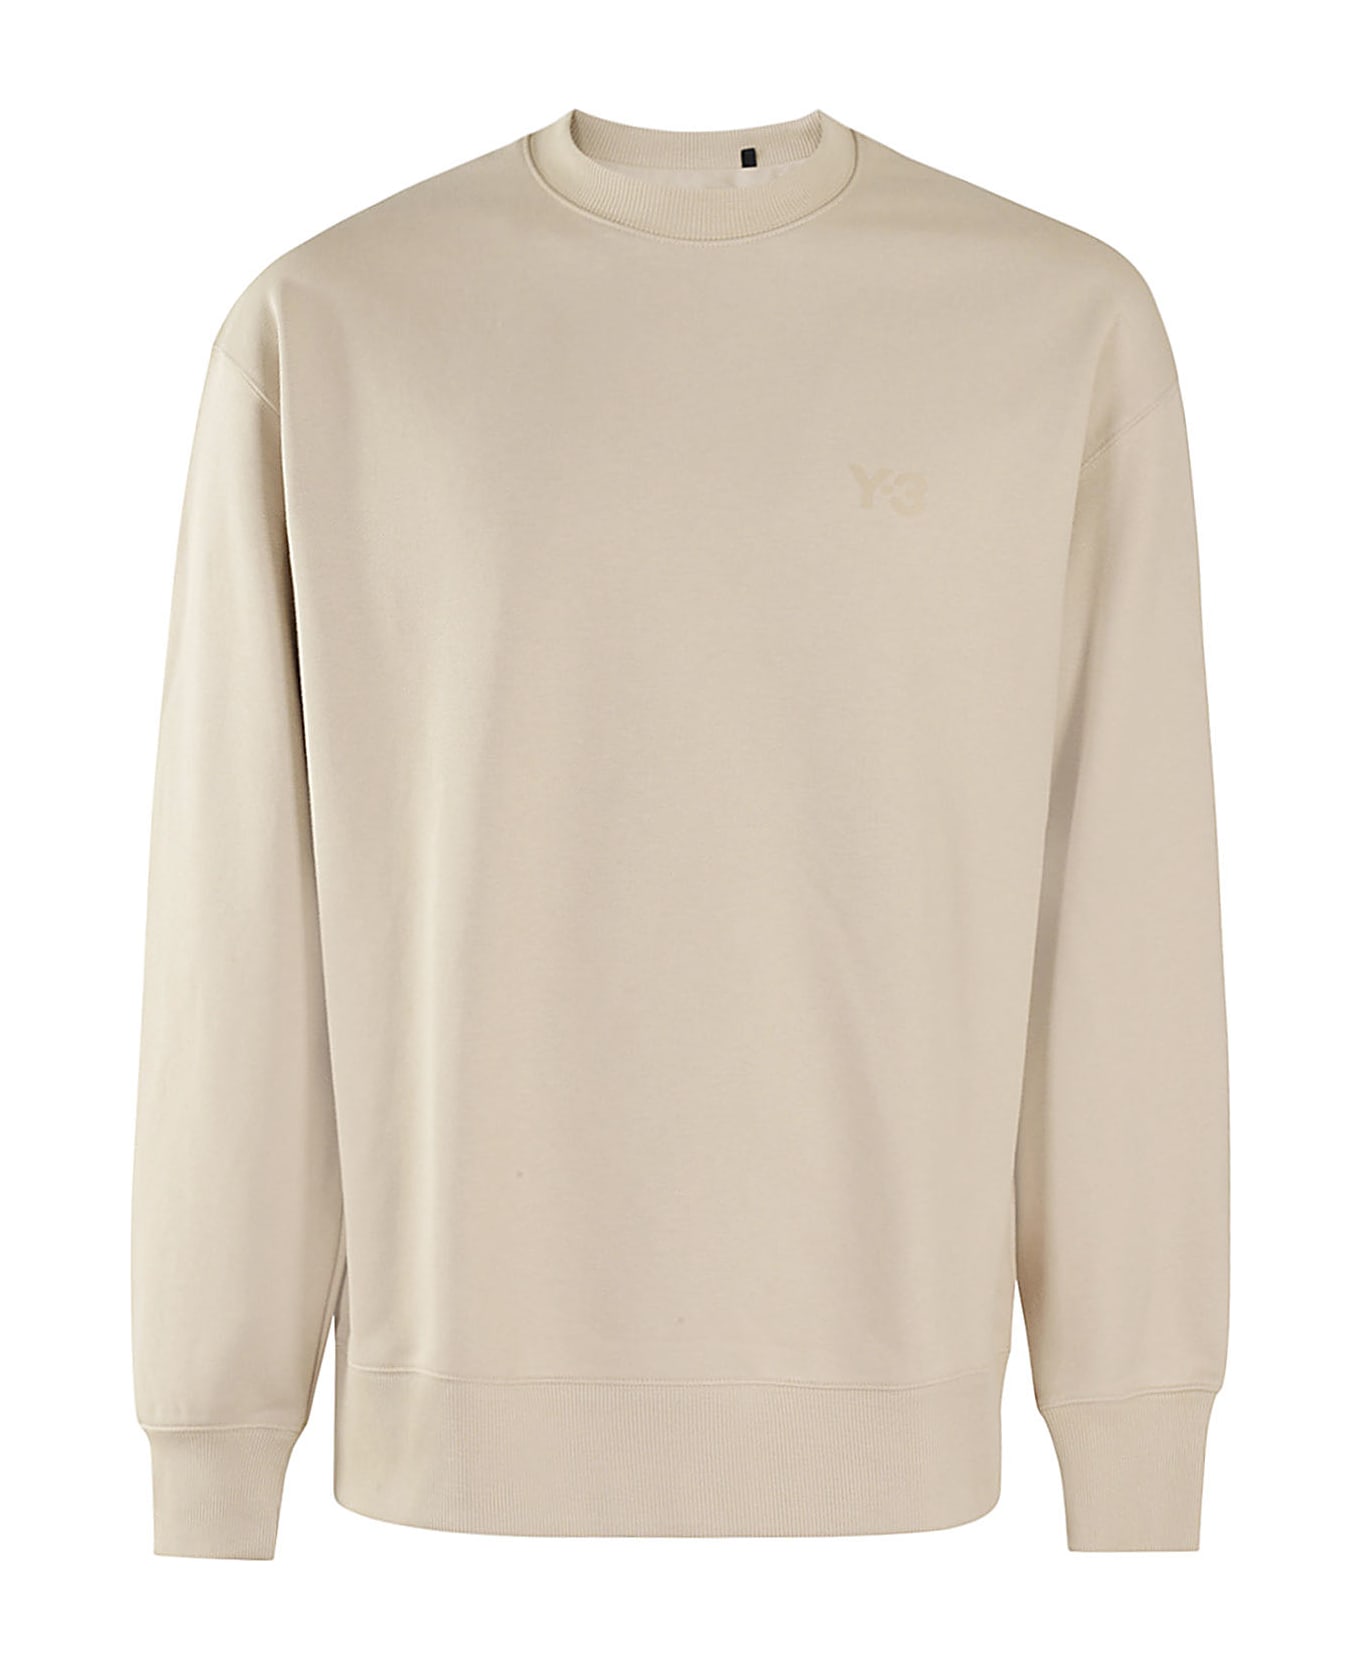 Y-3 Ft Crew Sweat - Taupe